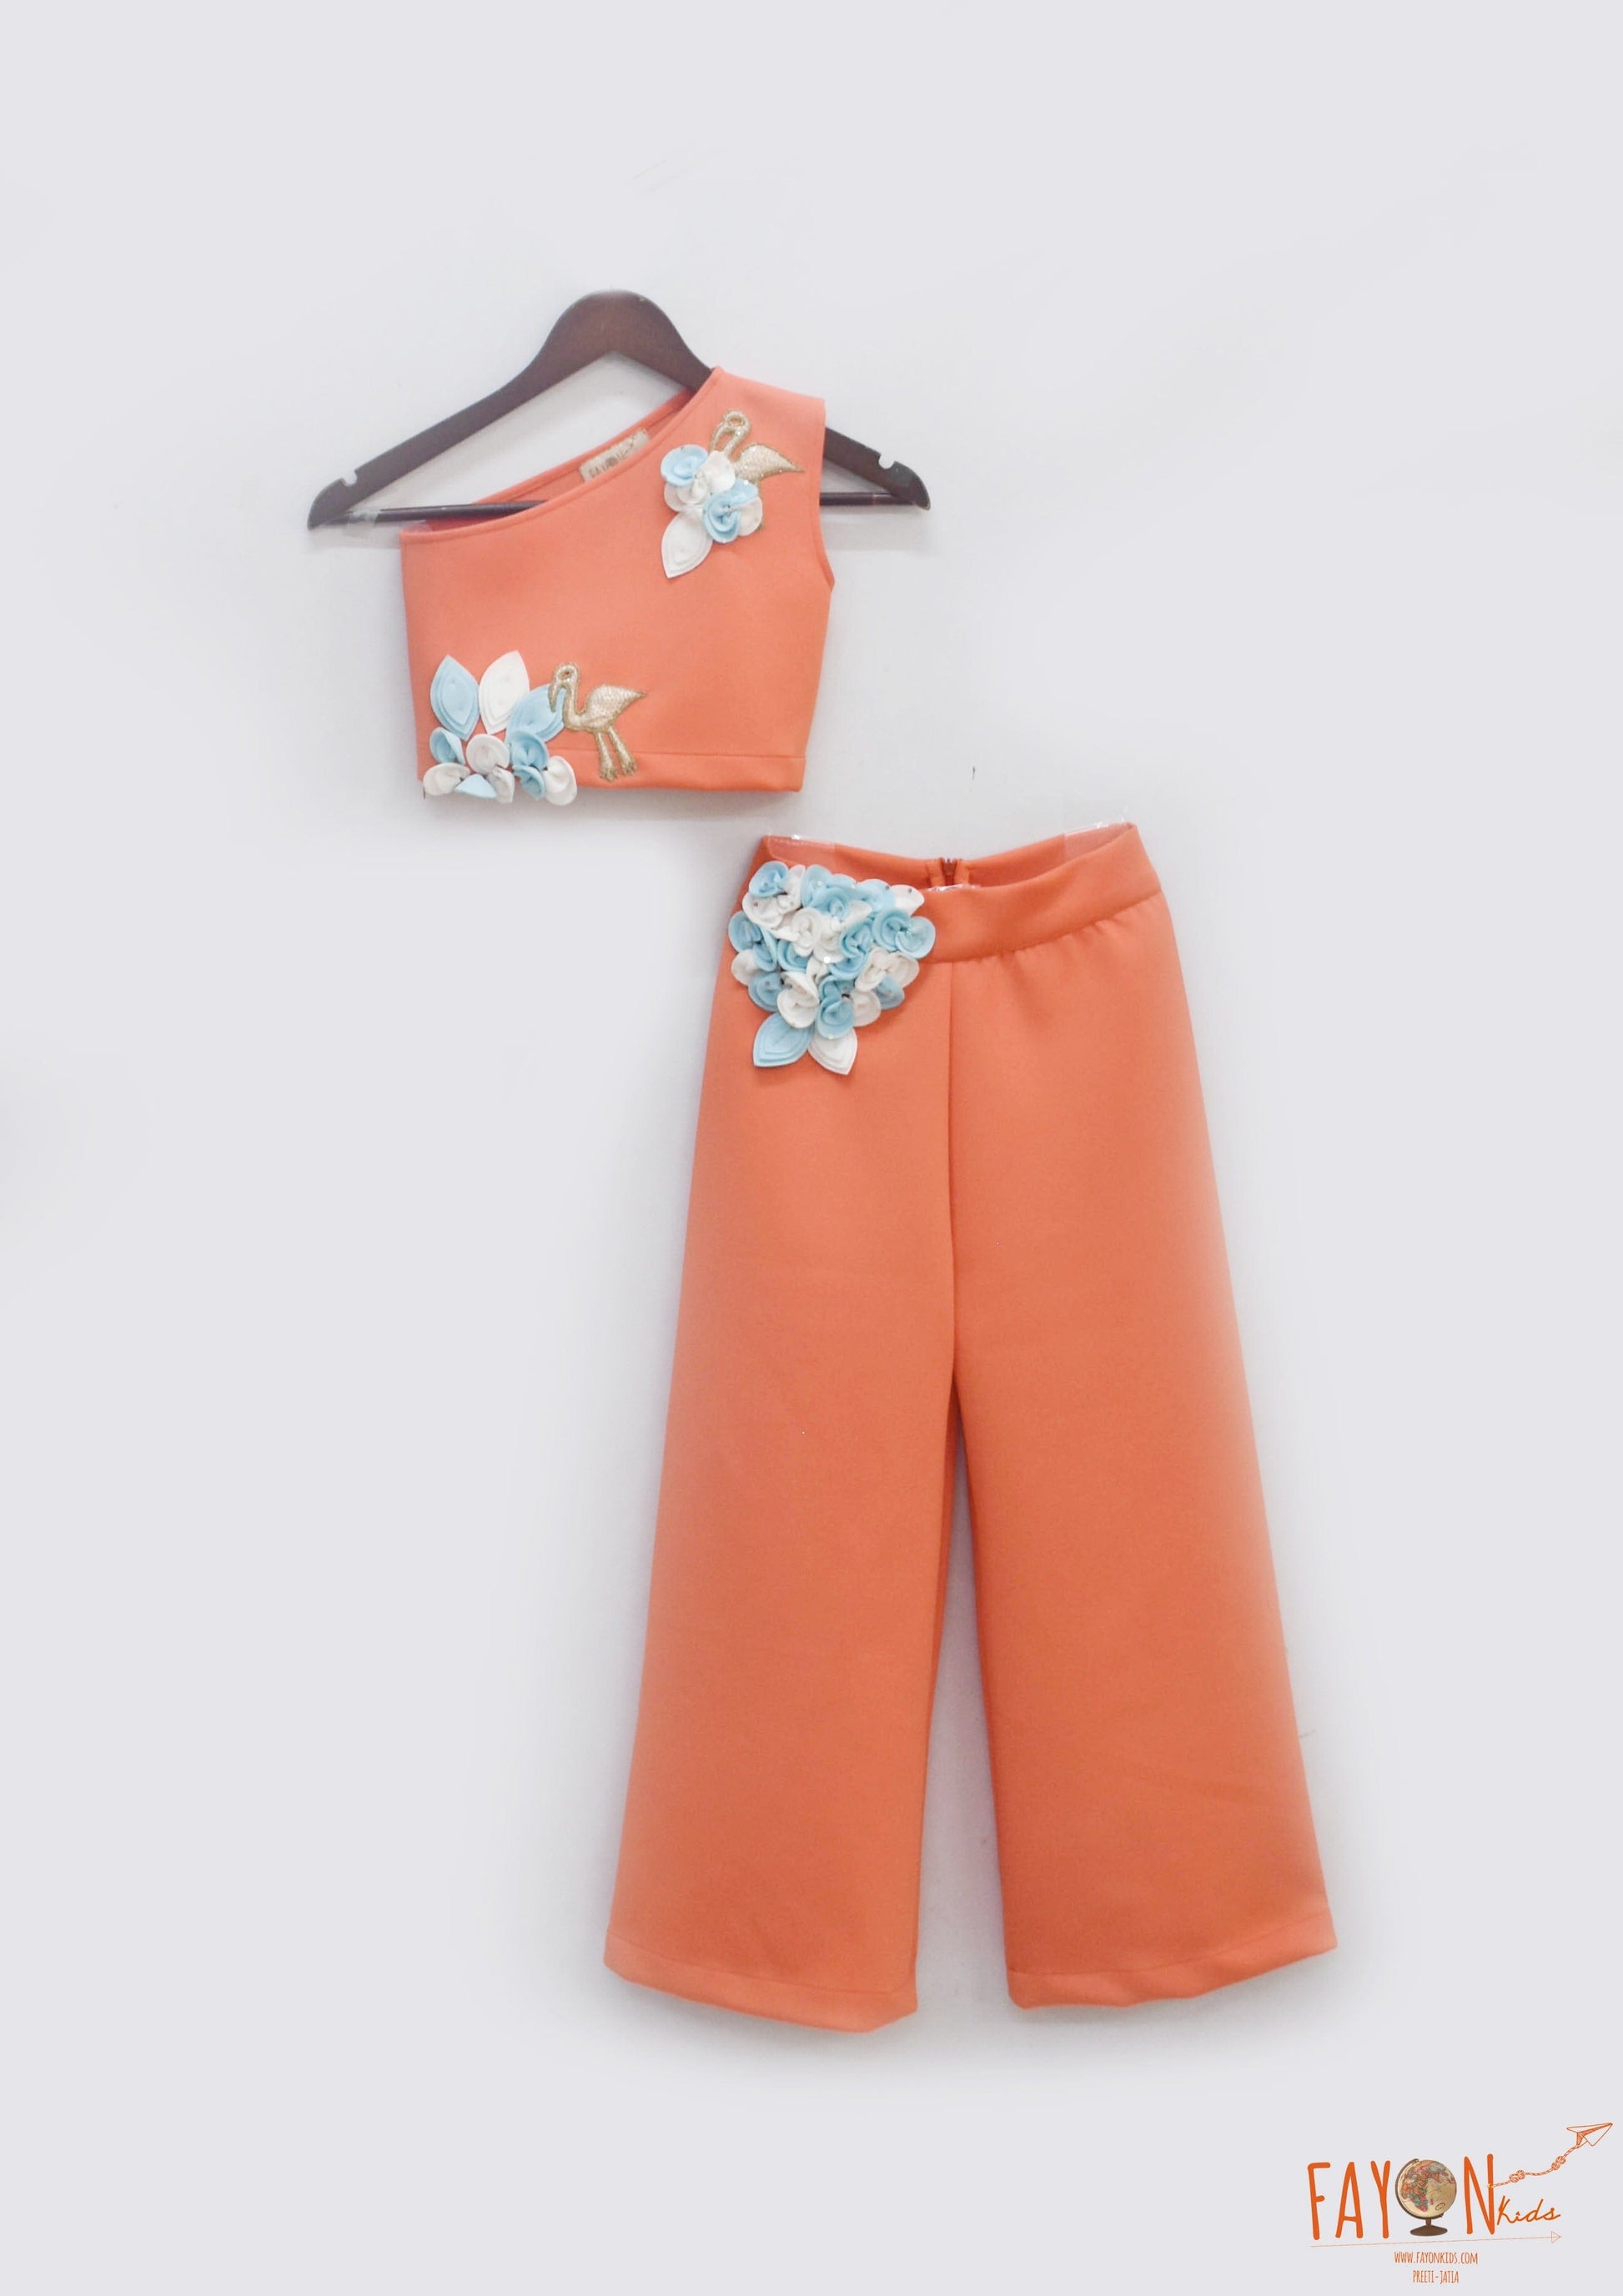 Fayon Kids Orange Neoprene with Top and Pant for Girls